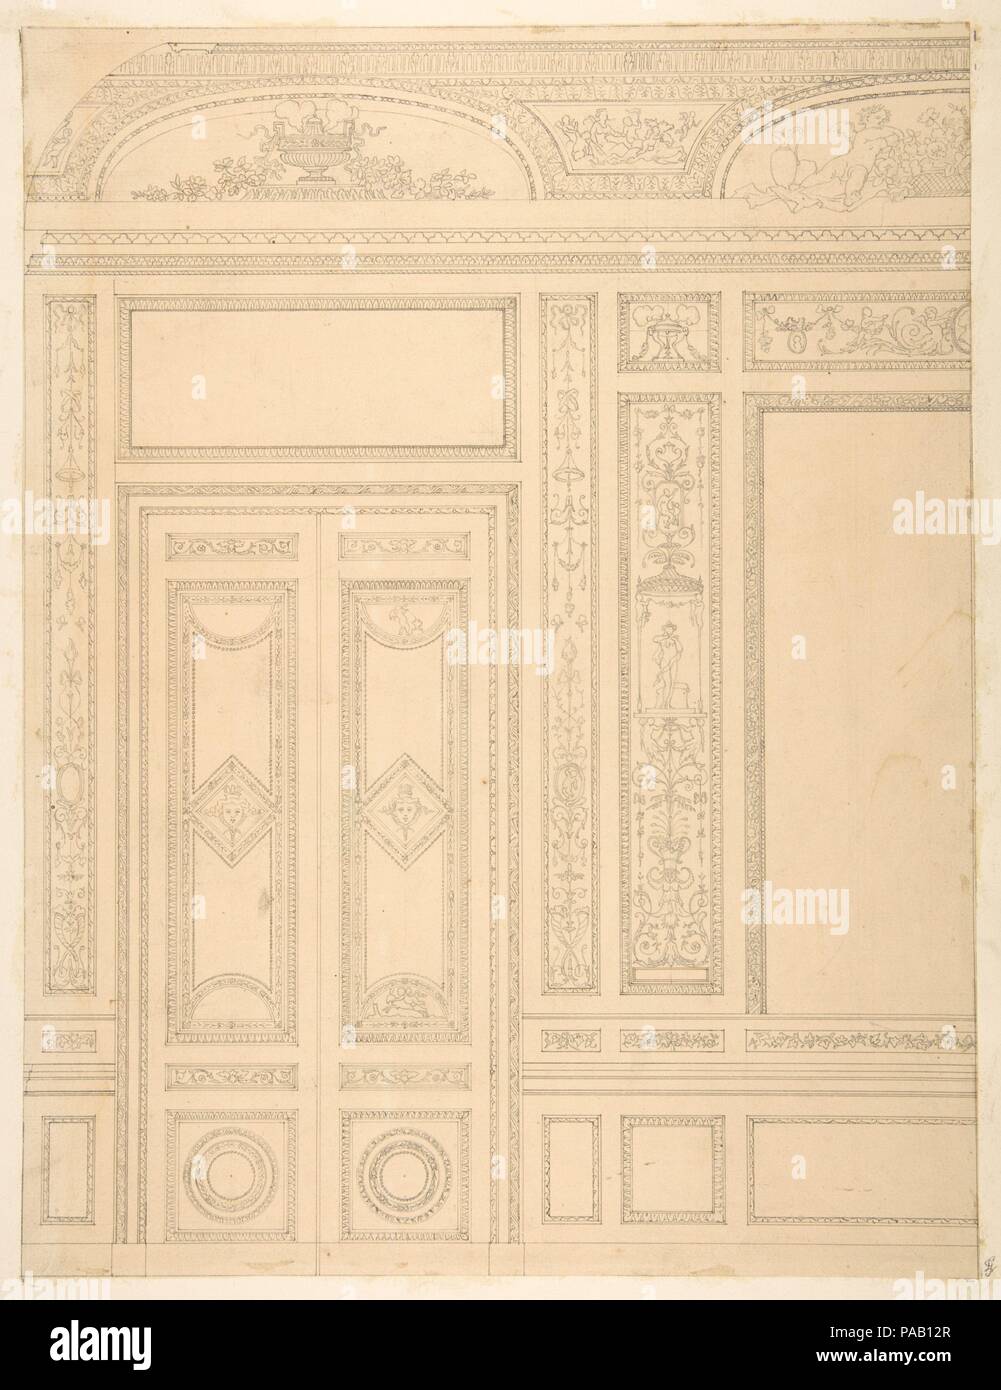 Elevation of an interior showing a paneled wall and double doors decorated in rococco sty.e. Artist: Jules-Edmond-Charles Lachaise (French, died 1897); Eugène-Pierre Gourdet (French, born Paris, 1820-1889). Date: 1830-97. Museum: Metropolitan Museum of Art, New York, USA. Stock Photo